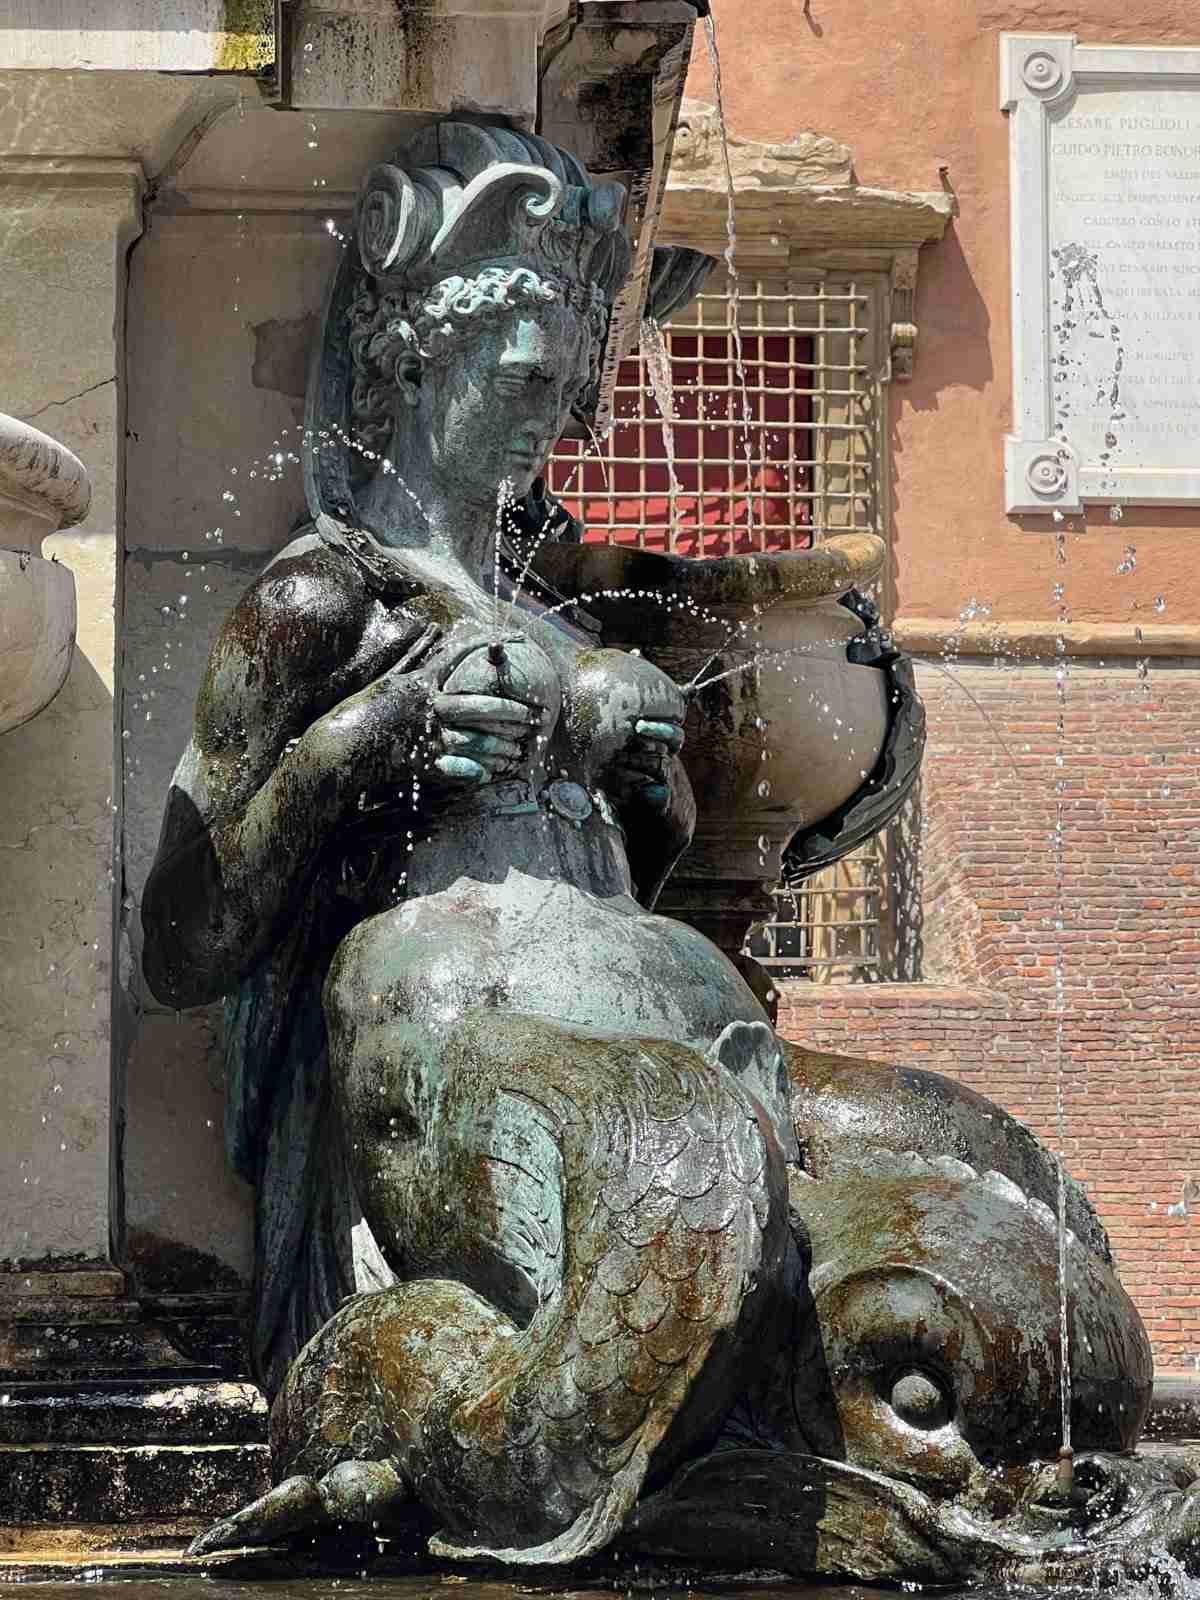 A statue fountain of a woman with large breasts spraying water.